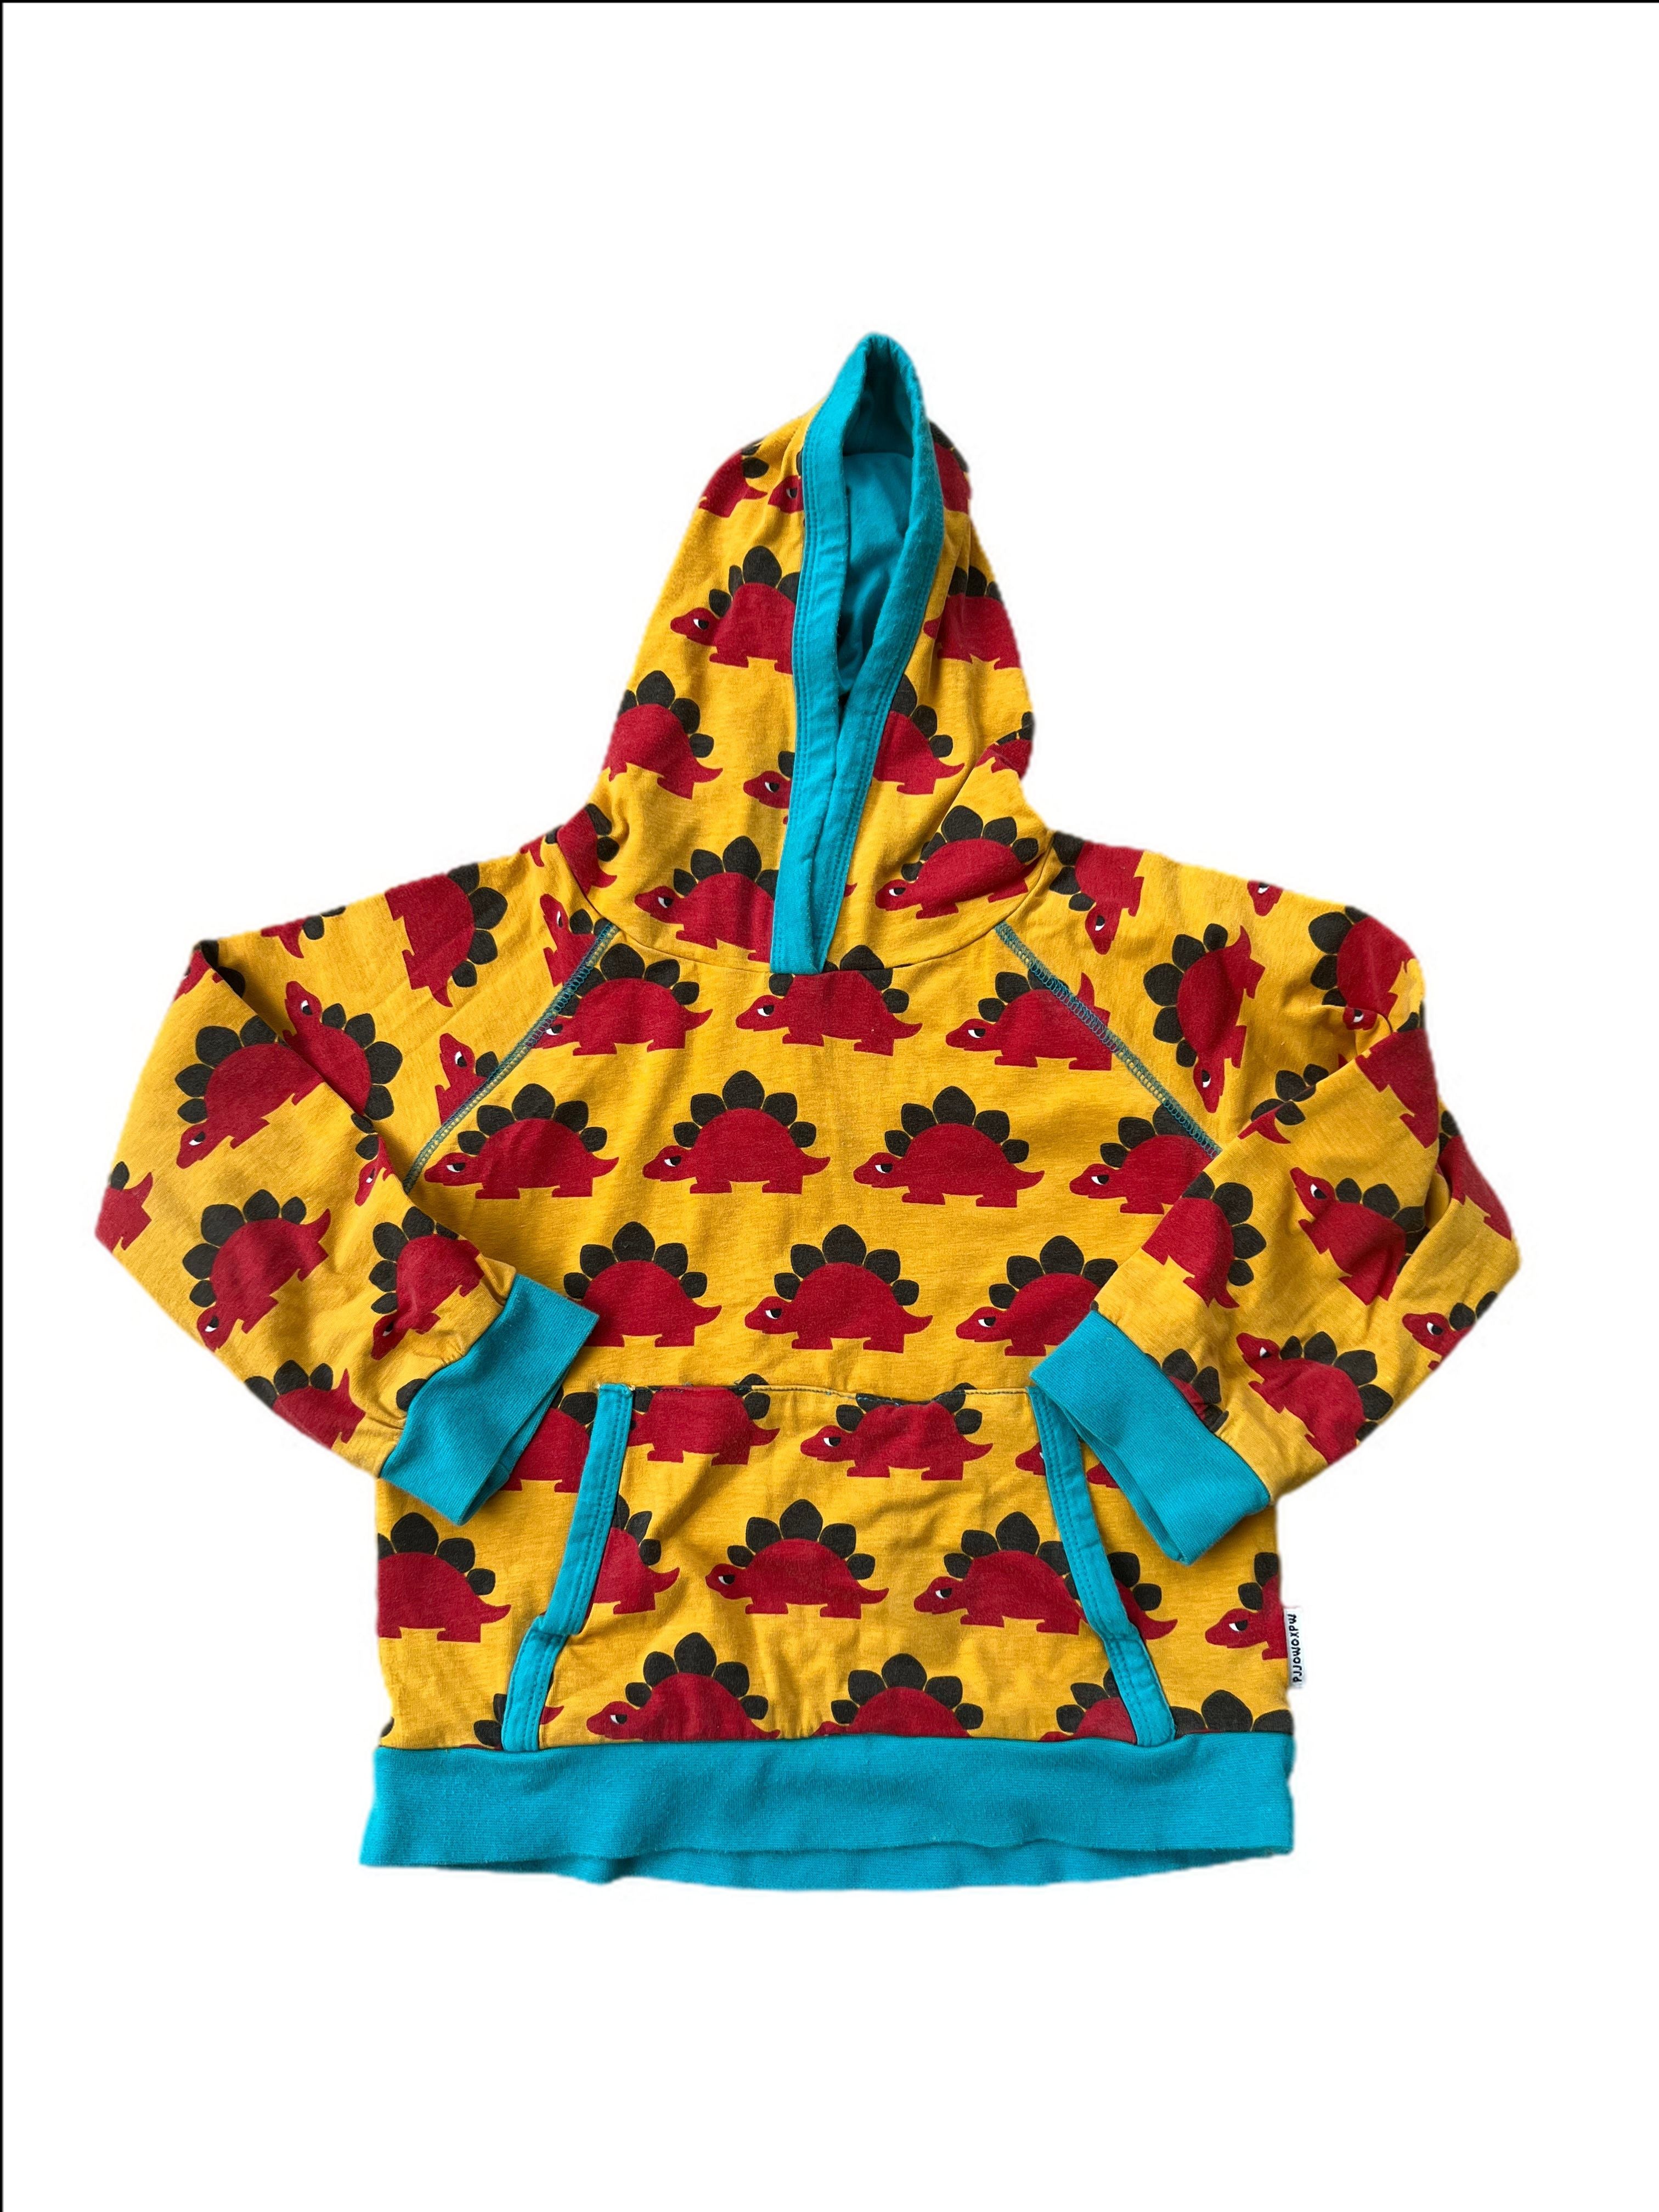 Dino Pullover hoodie some stitches missing